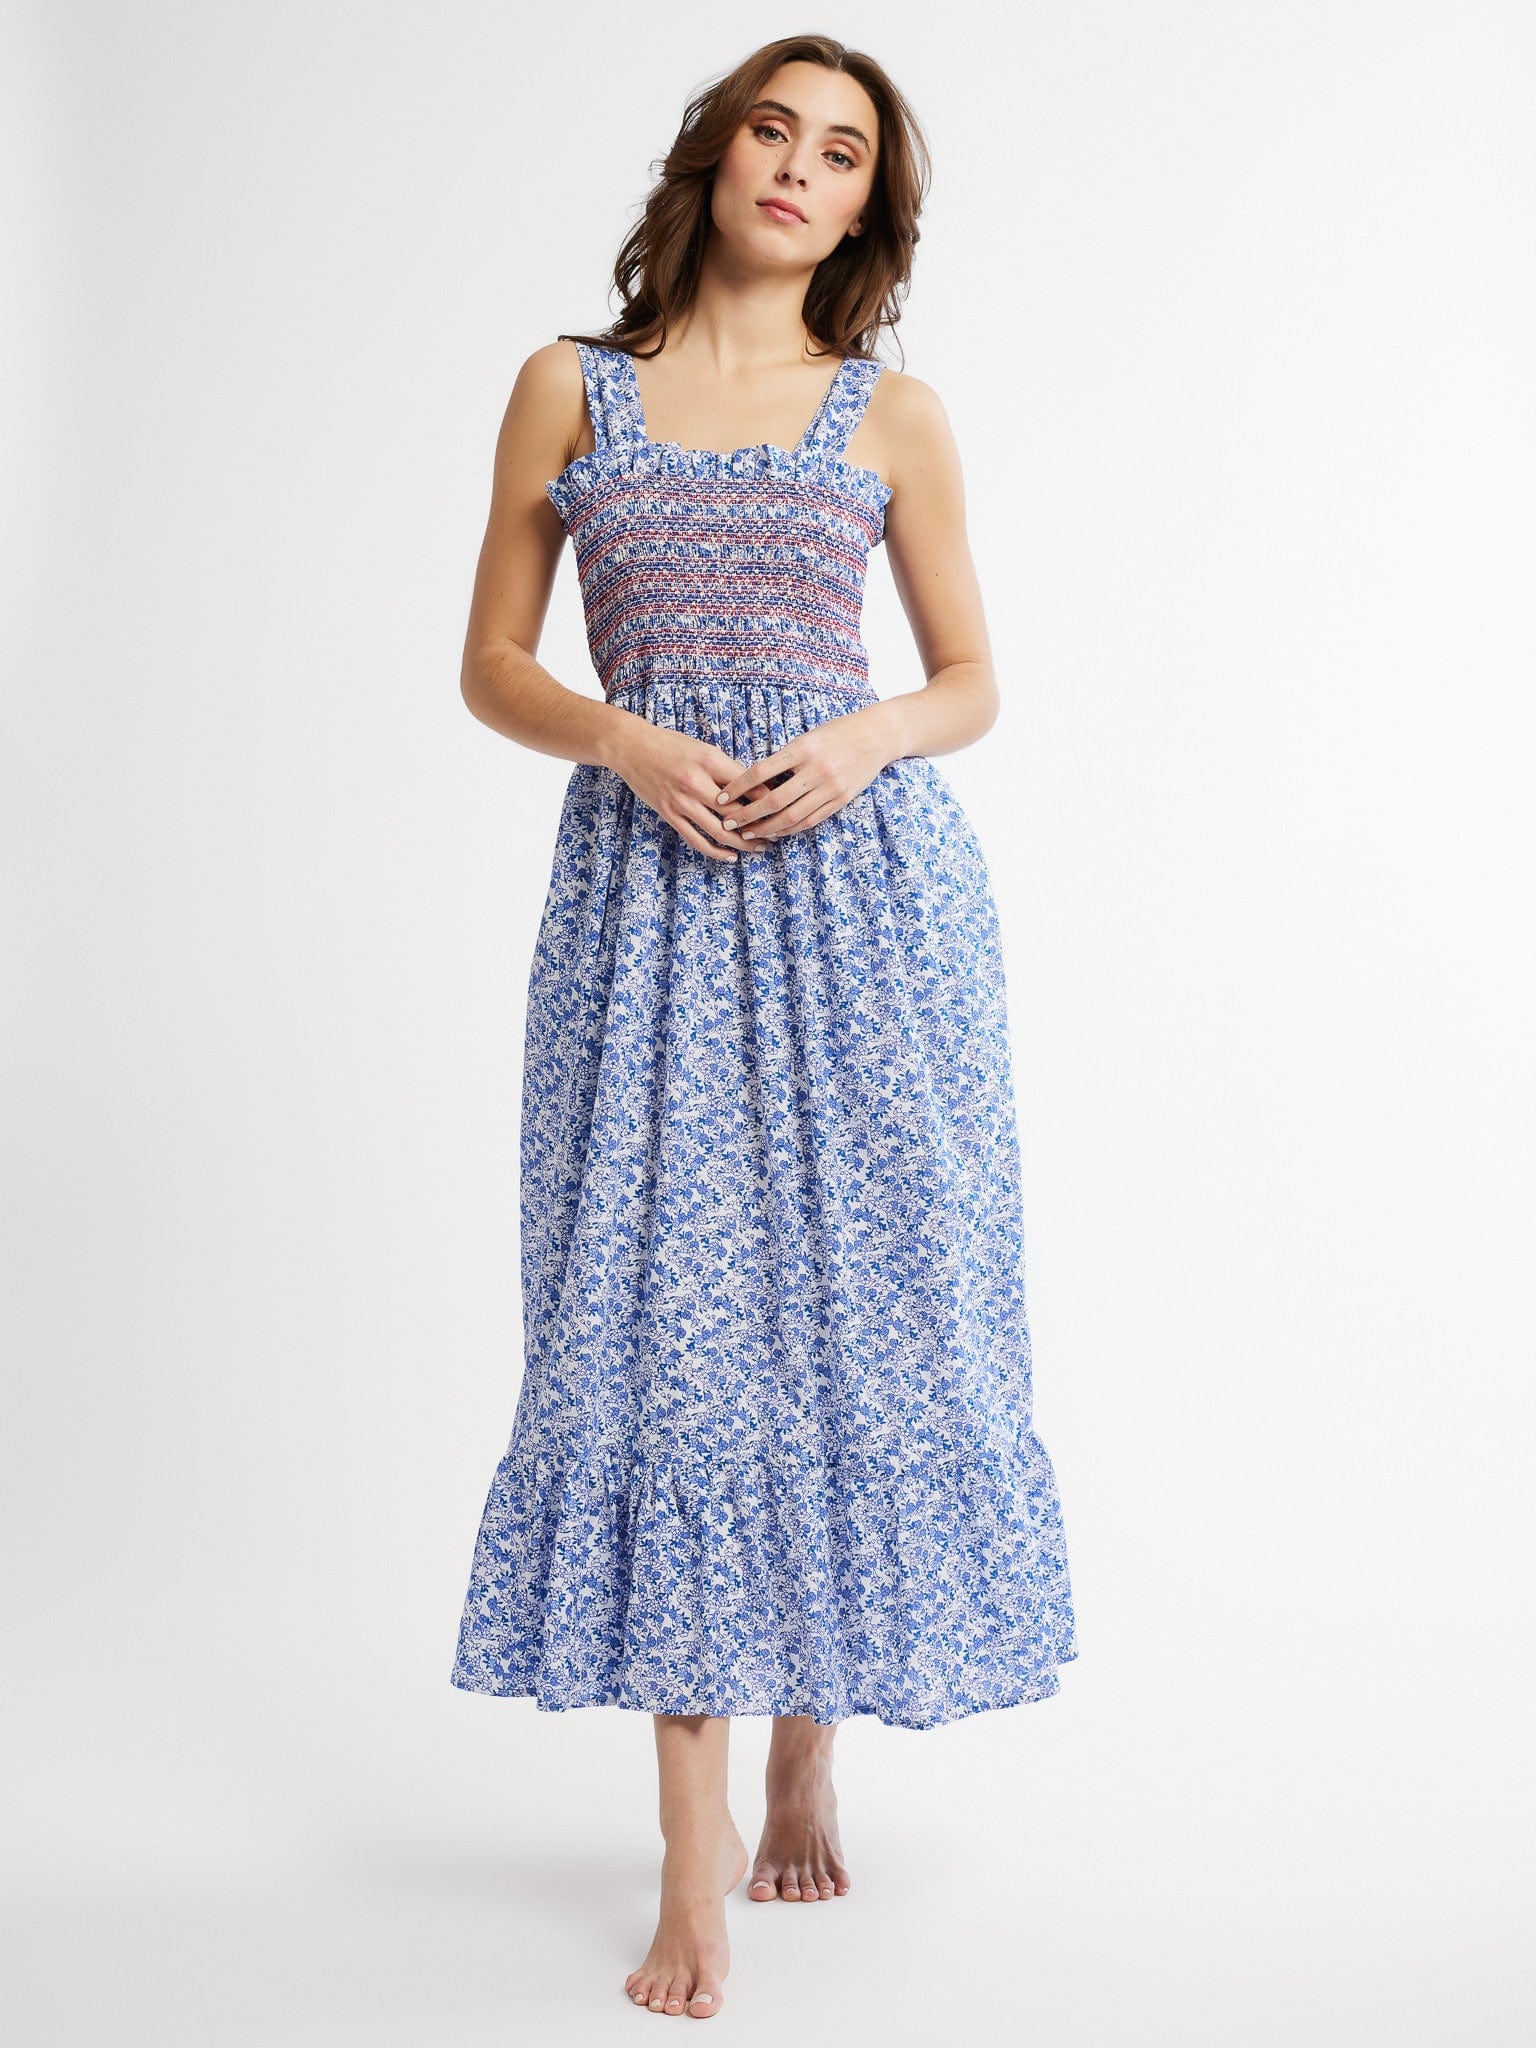 MILLE Clothing Garden Dress in Condesa Floral